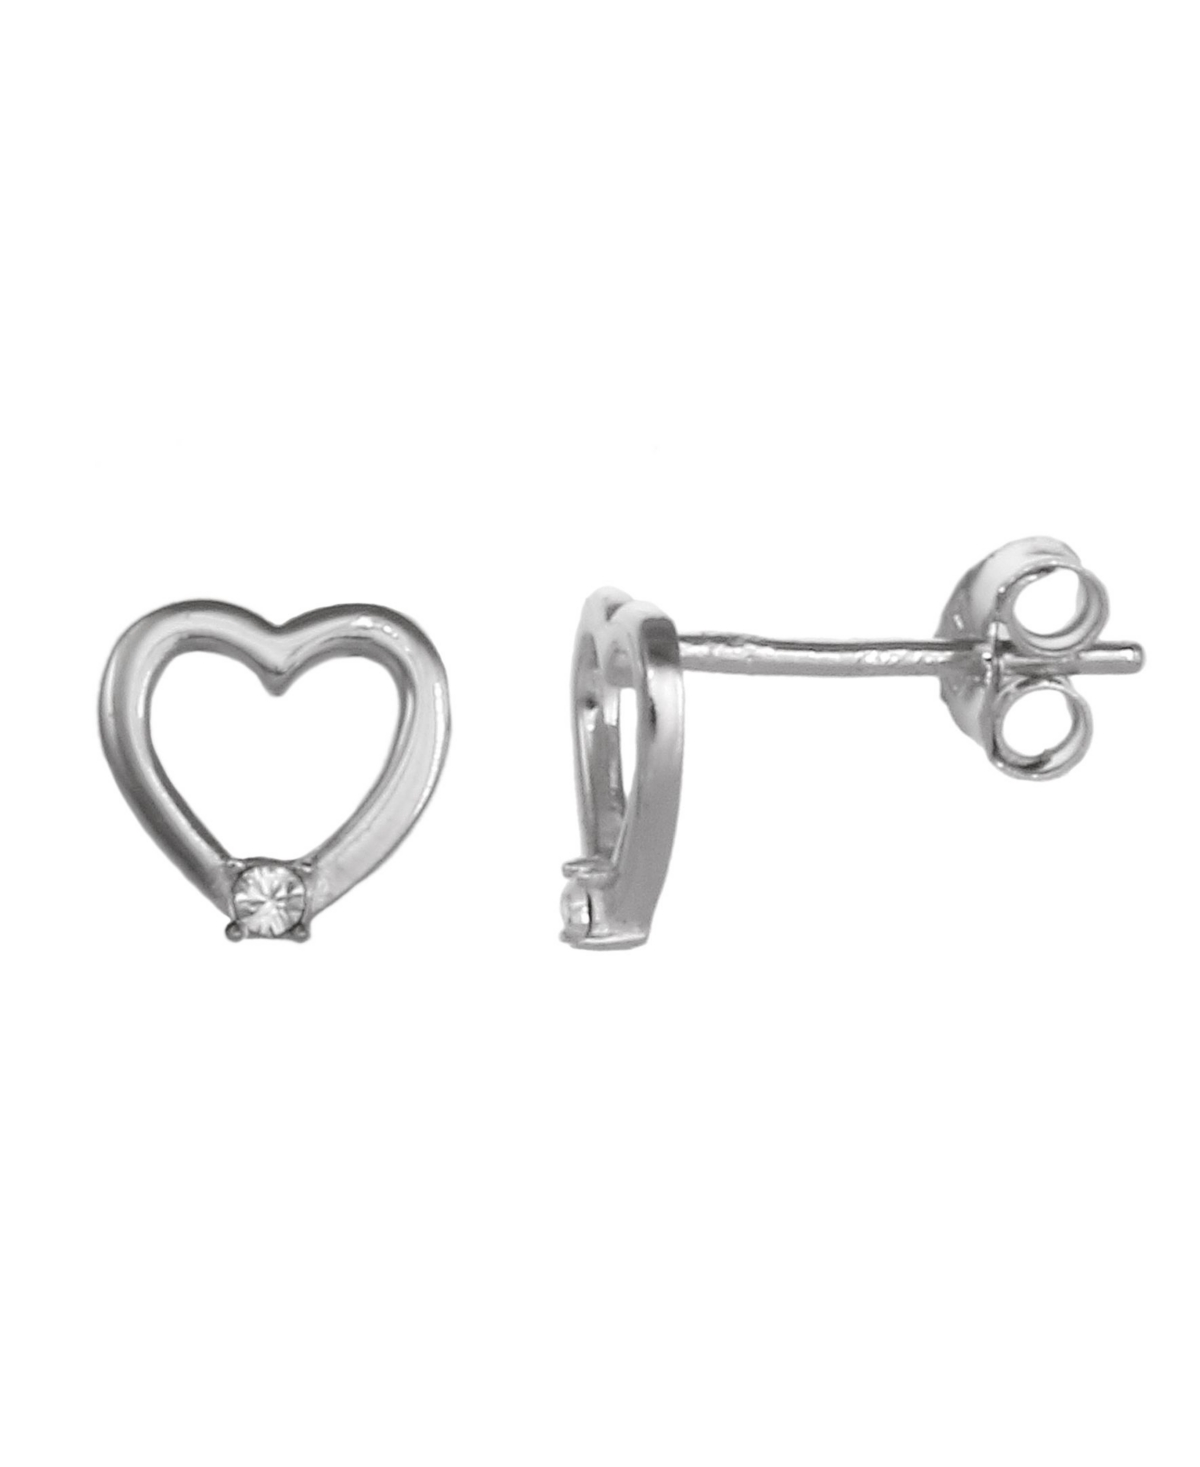 Fao Schwarz Women's Sterling Silver Heart Stud Earrings with Crystal Stone Accent